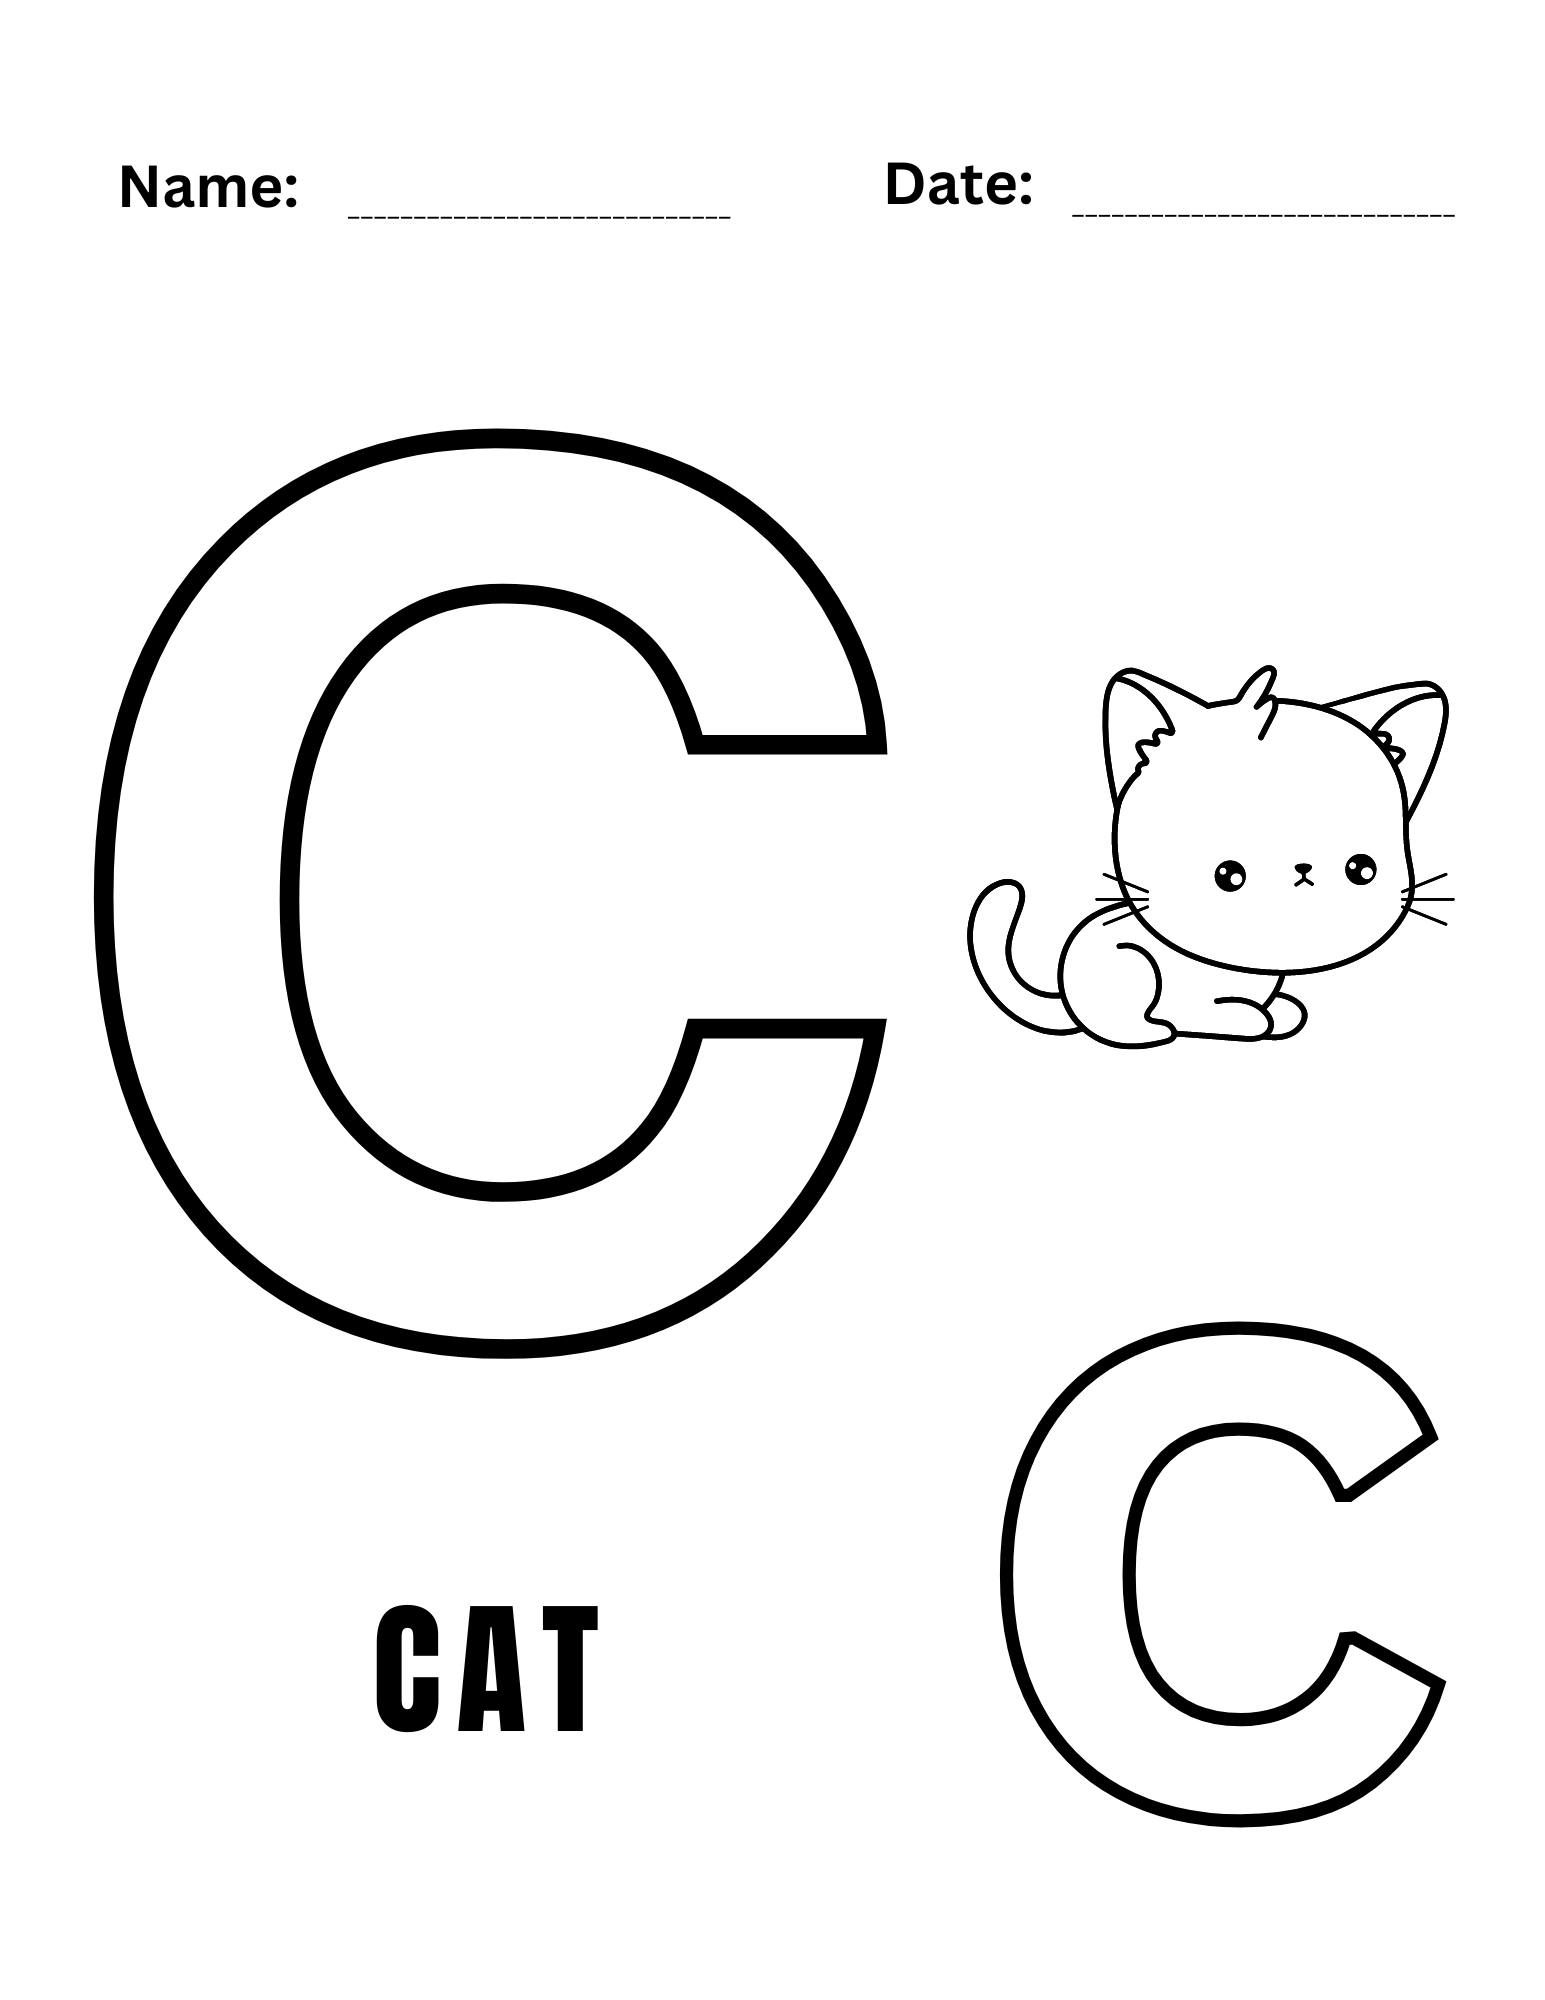 A cute cat sitting on a letter 'C' coloring page